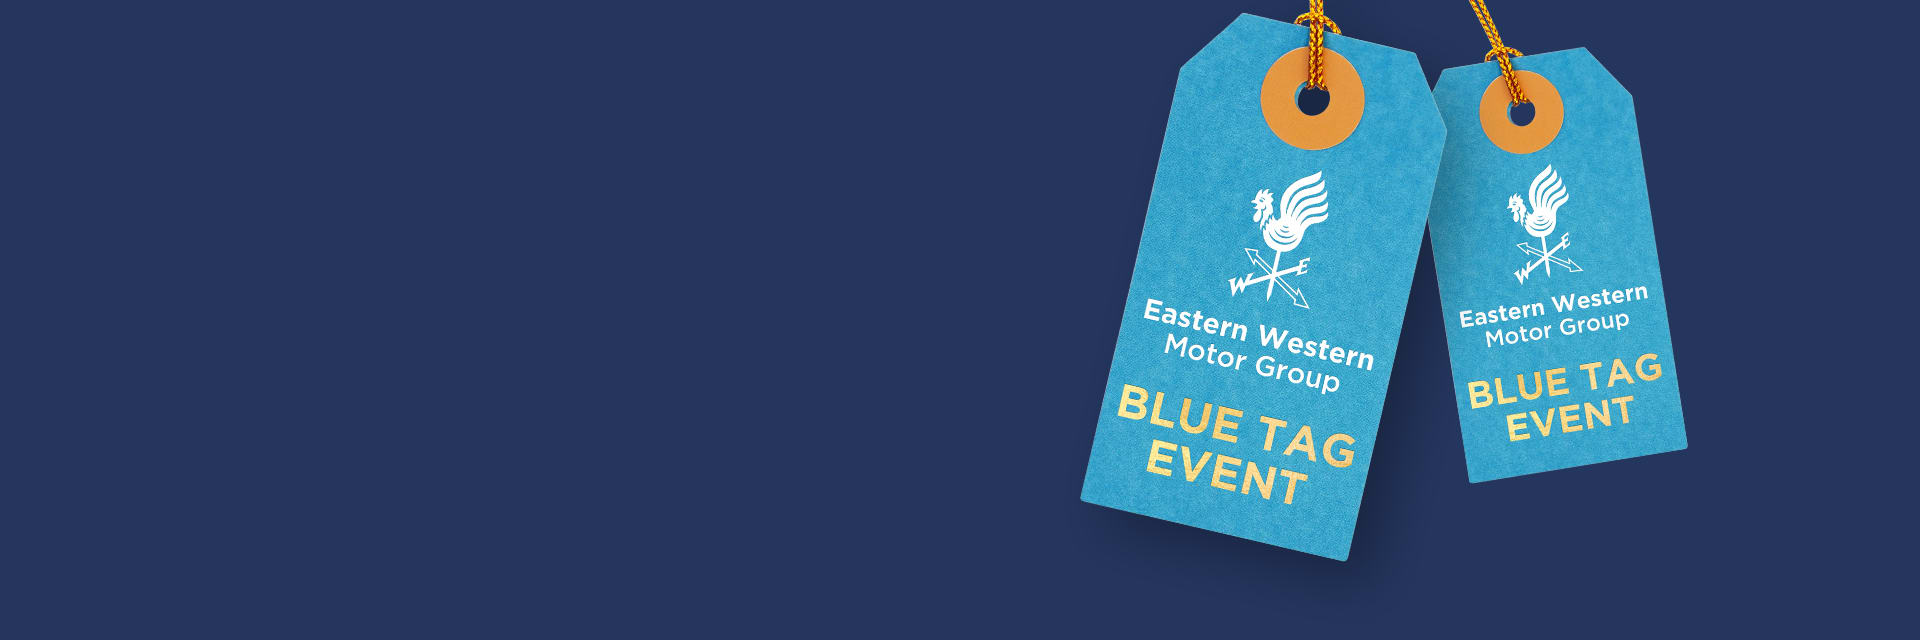 BLUE TAG EVENT NOW ON 